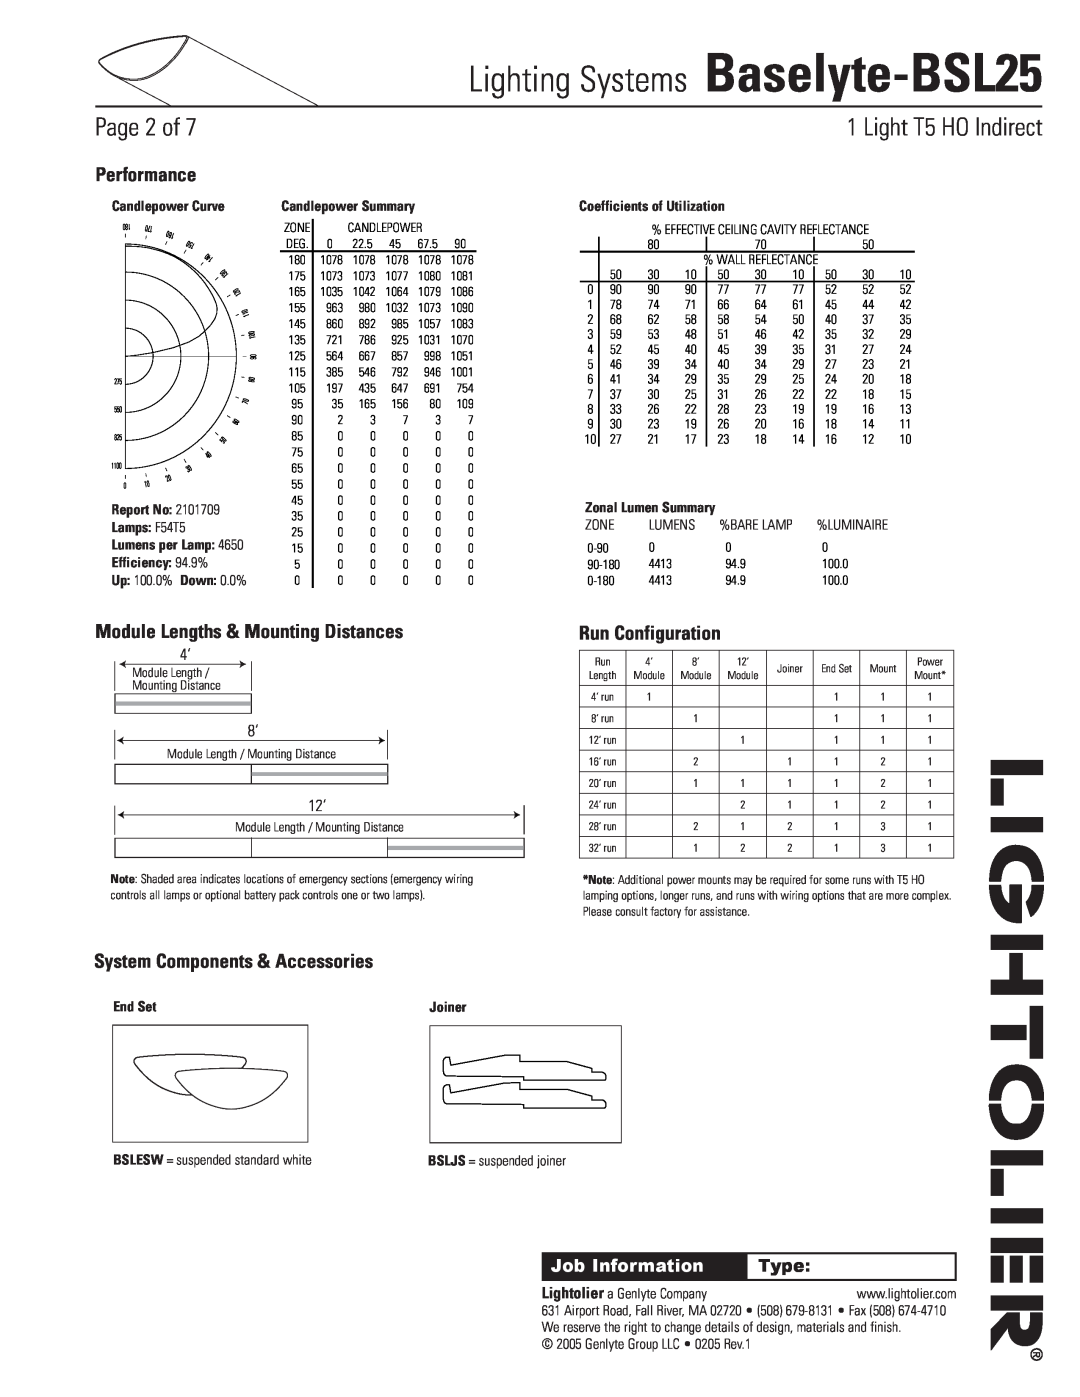 Lightolier Lighting Systems Baselyte-BSL25, Page of, Performance, Module Lengths & Mounting Distances, Type, End Set 